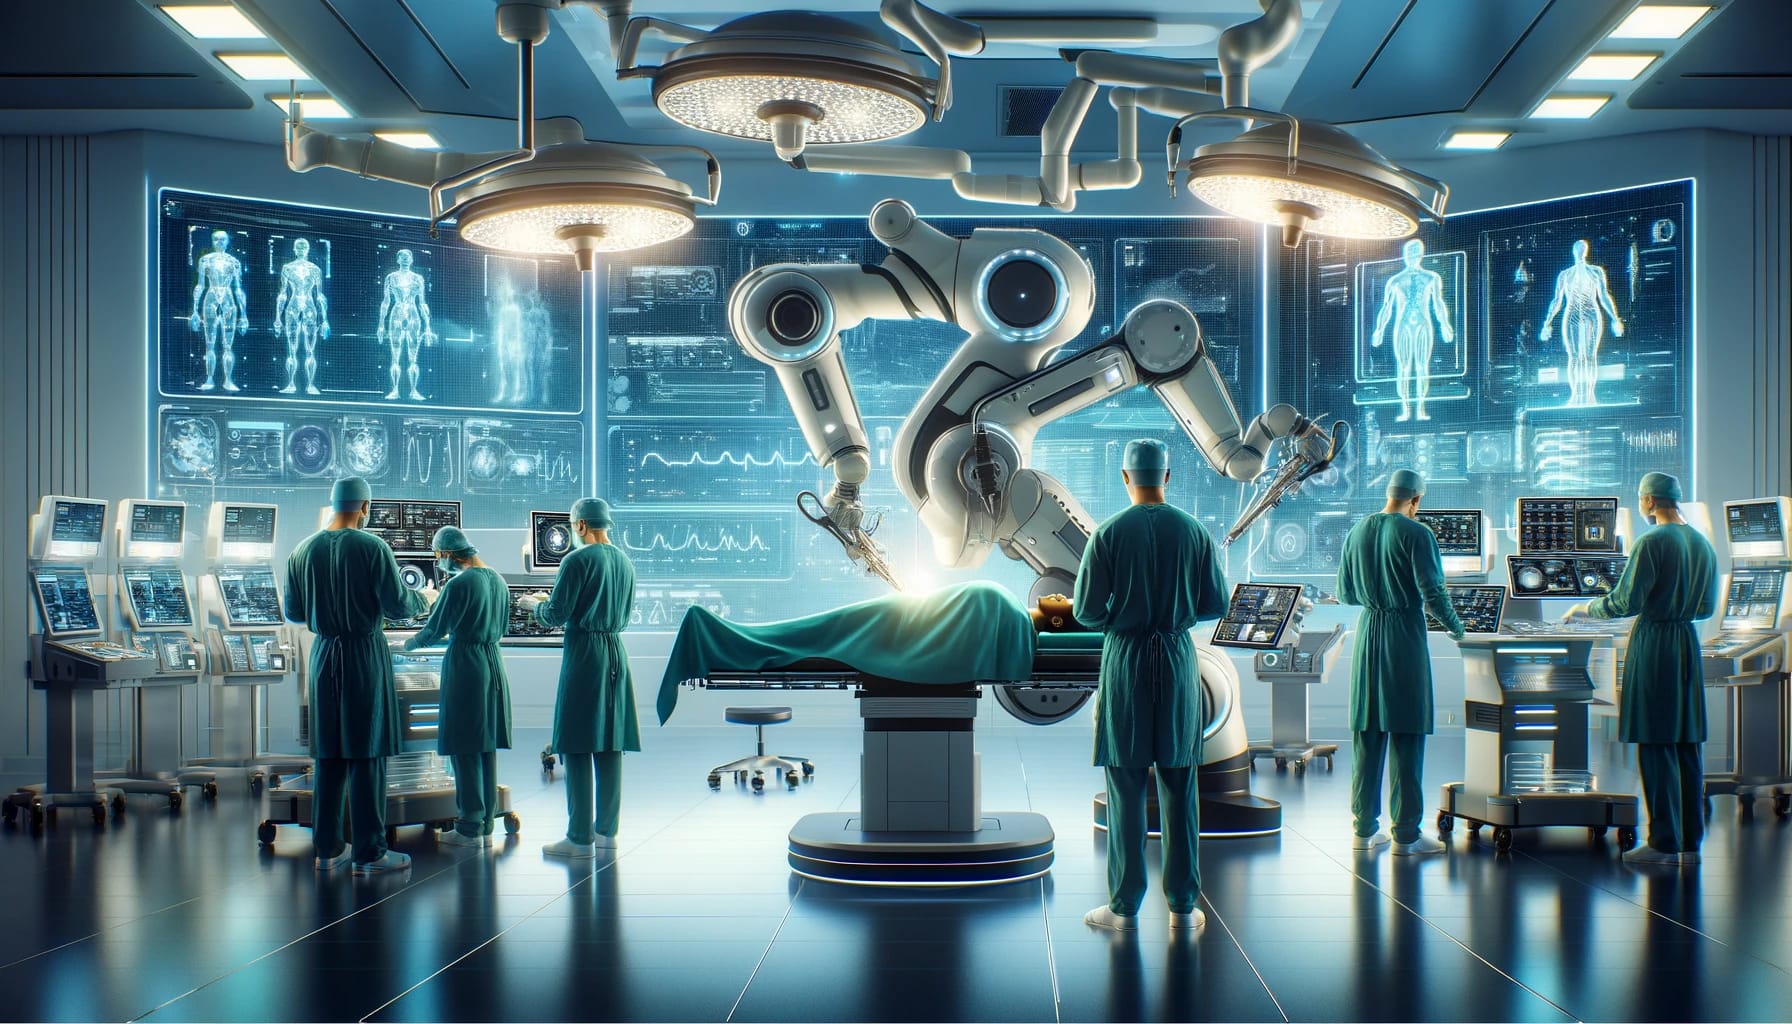 A futuristic operating room featuring a robotic surgical arm performing surgery on a patient, overseen by a team of doctors using advanced computer monitors and holographic displays. The room is filled with high-tech equipment and glowing interfaces, showing data and vital signs. The setting is clean, modern, and brightly lit, emphasizing a sterile and advanced medical environment. The doctors are diverse in ethnicity, wearing scrubs and focused on the procedure.